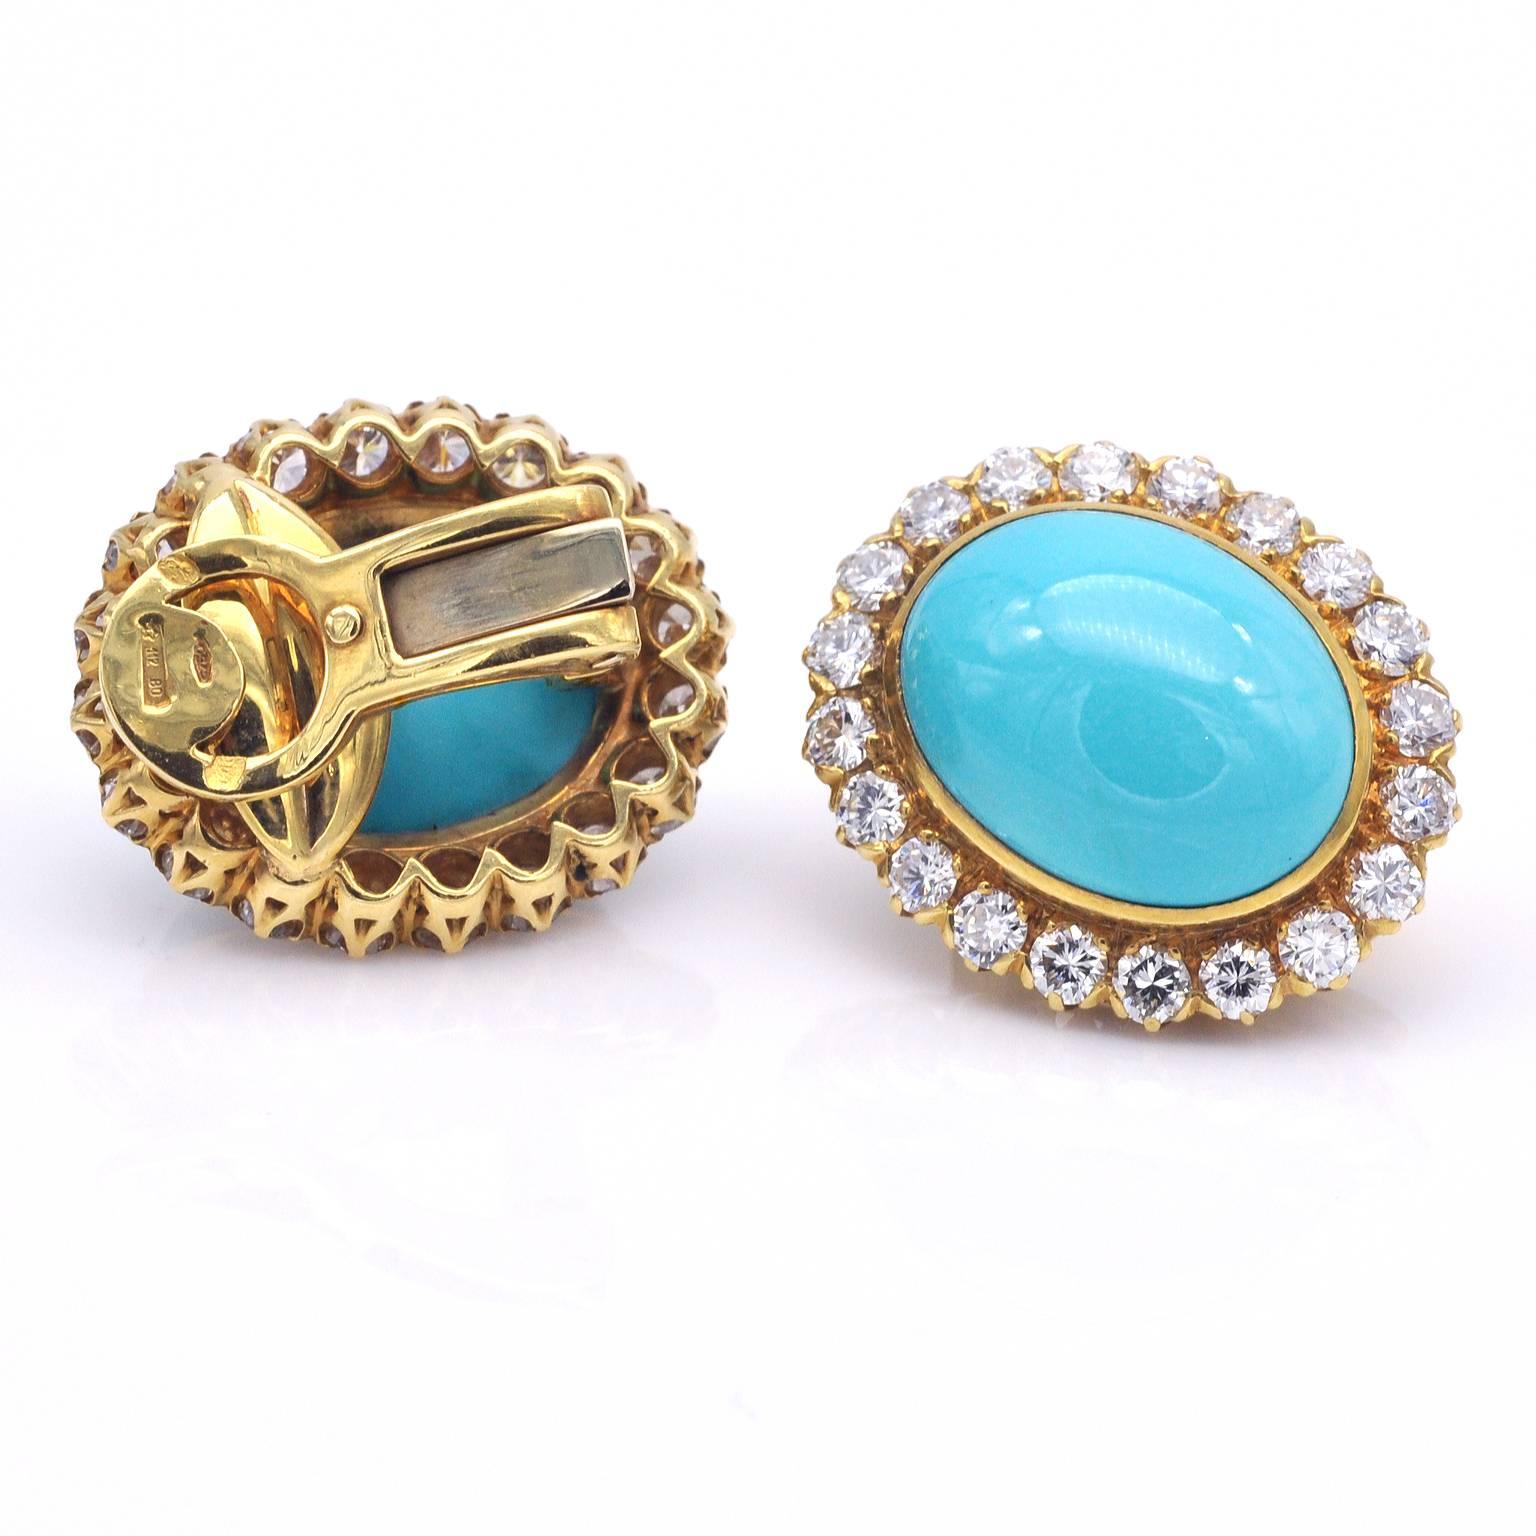 Elegant halo earrings. Twenty top quality diamonds ( color G clarity VS or better) surround each turquoise. The make and the setting of these earrings are excellent, surely made by master craftsmen.
Diamond weight : ± 2.4 carats

Matches well